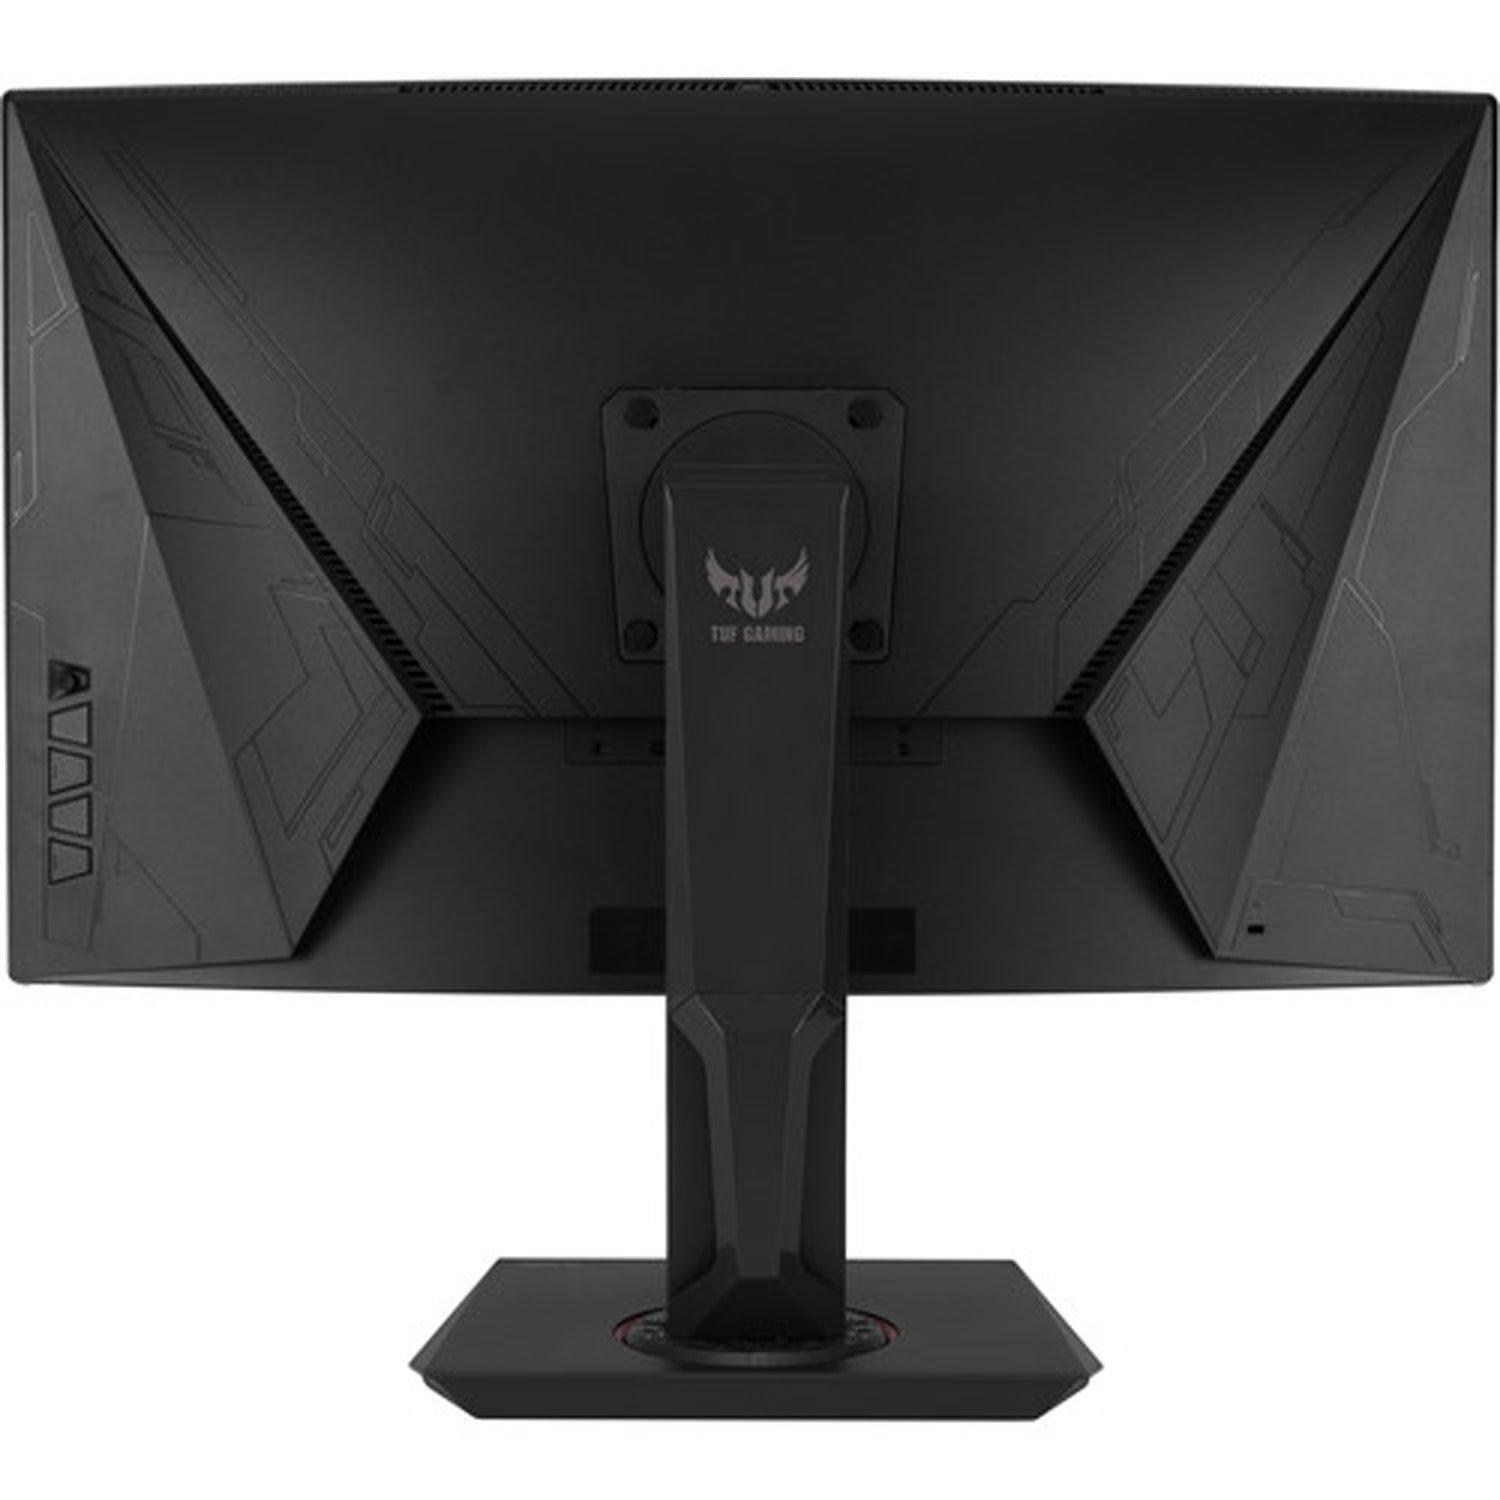 ASUS TUF Gaming 32-in HDR FreeSync Curved Gaming Monitor VG32VQ